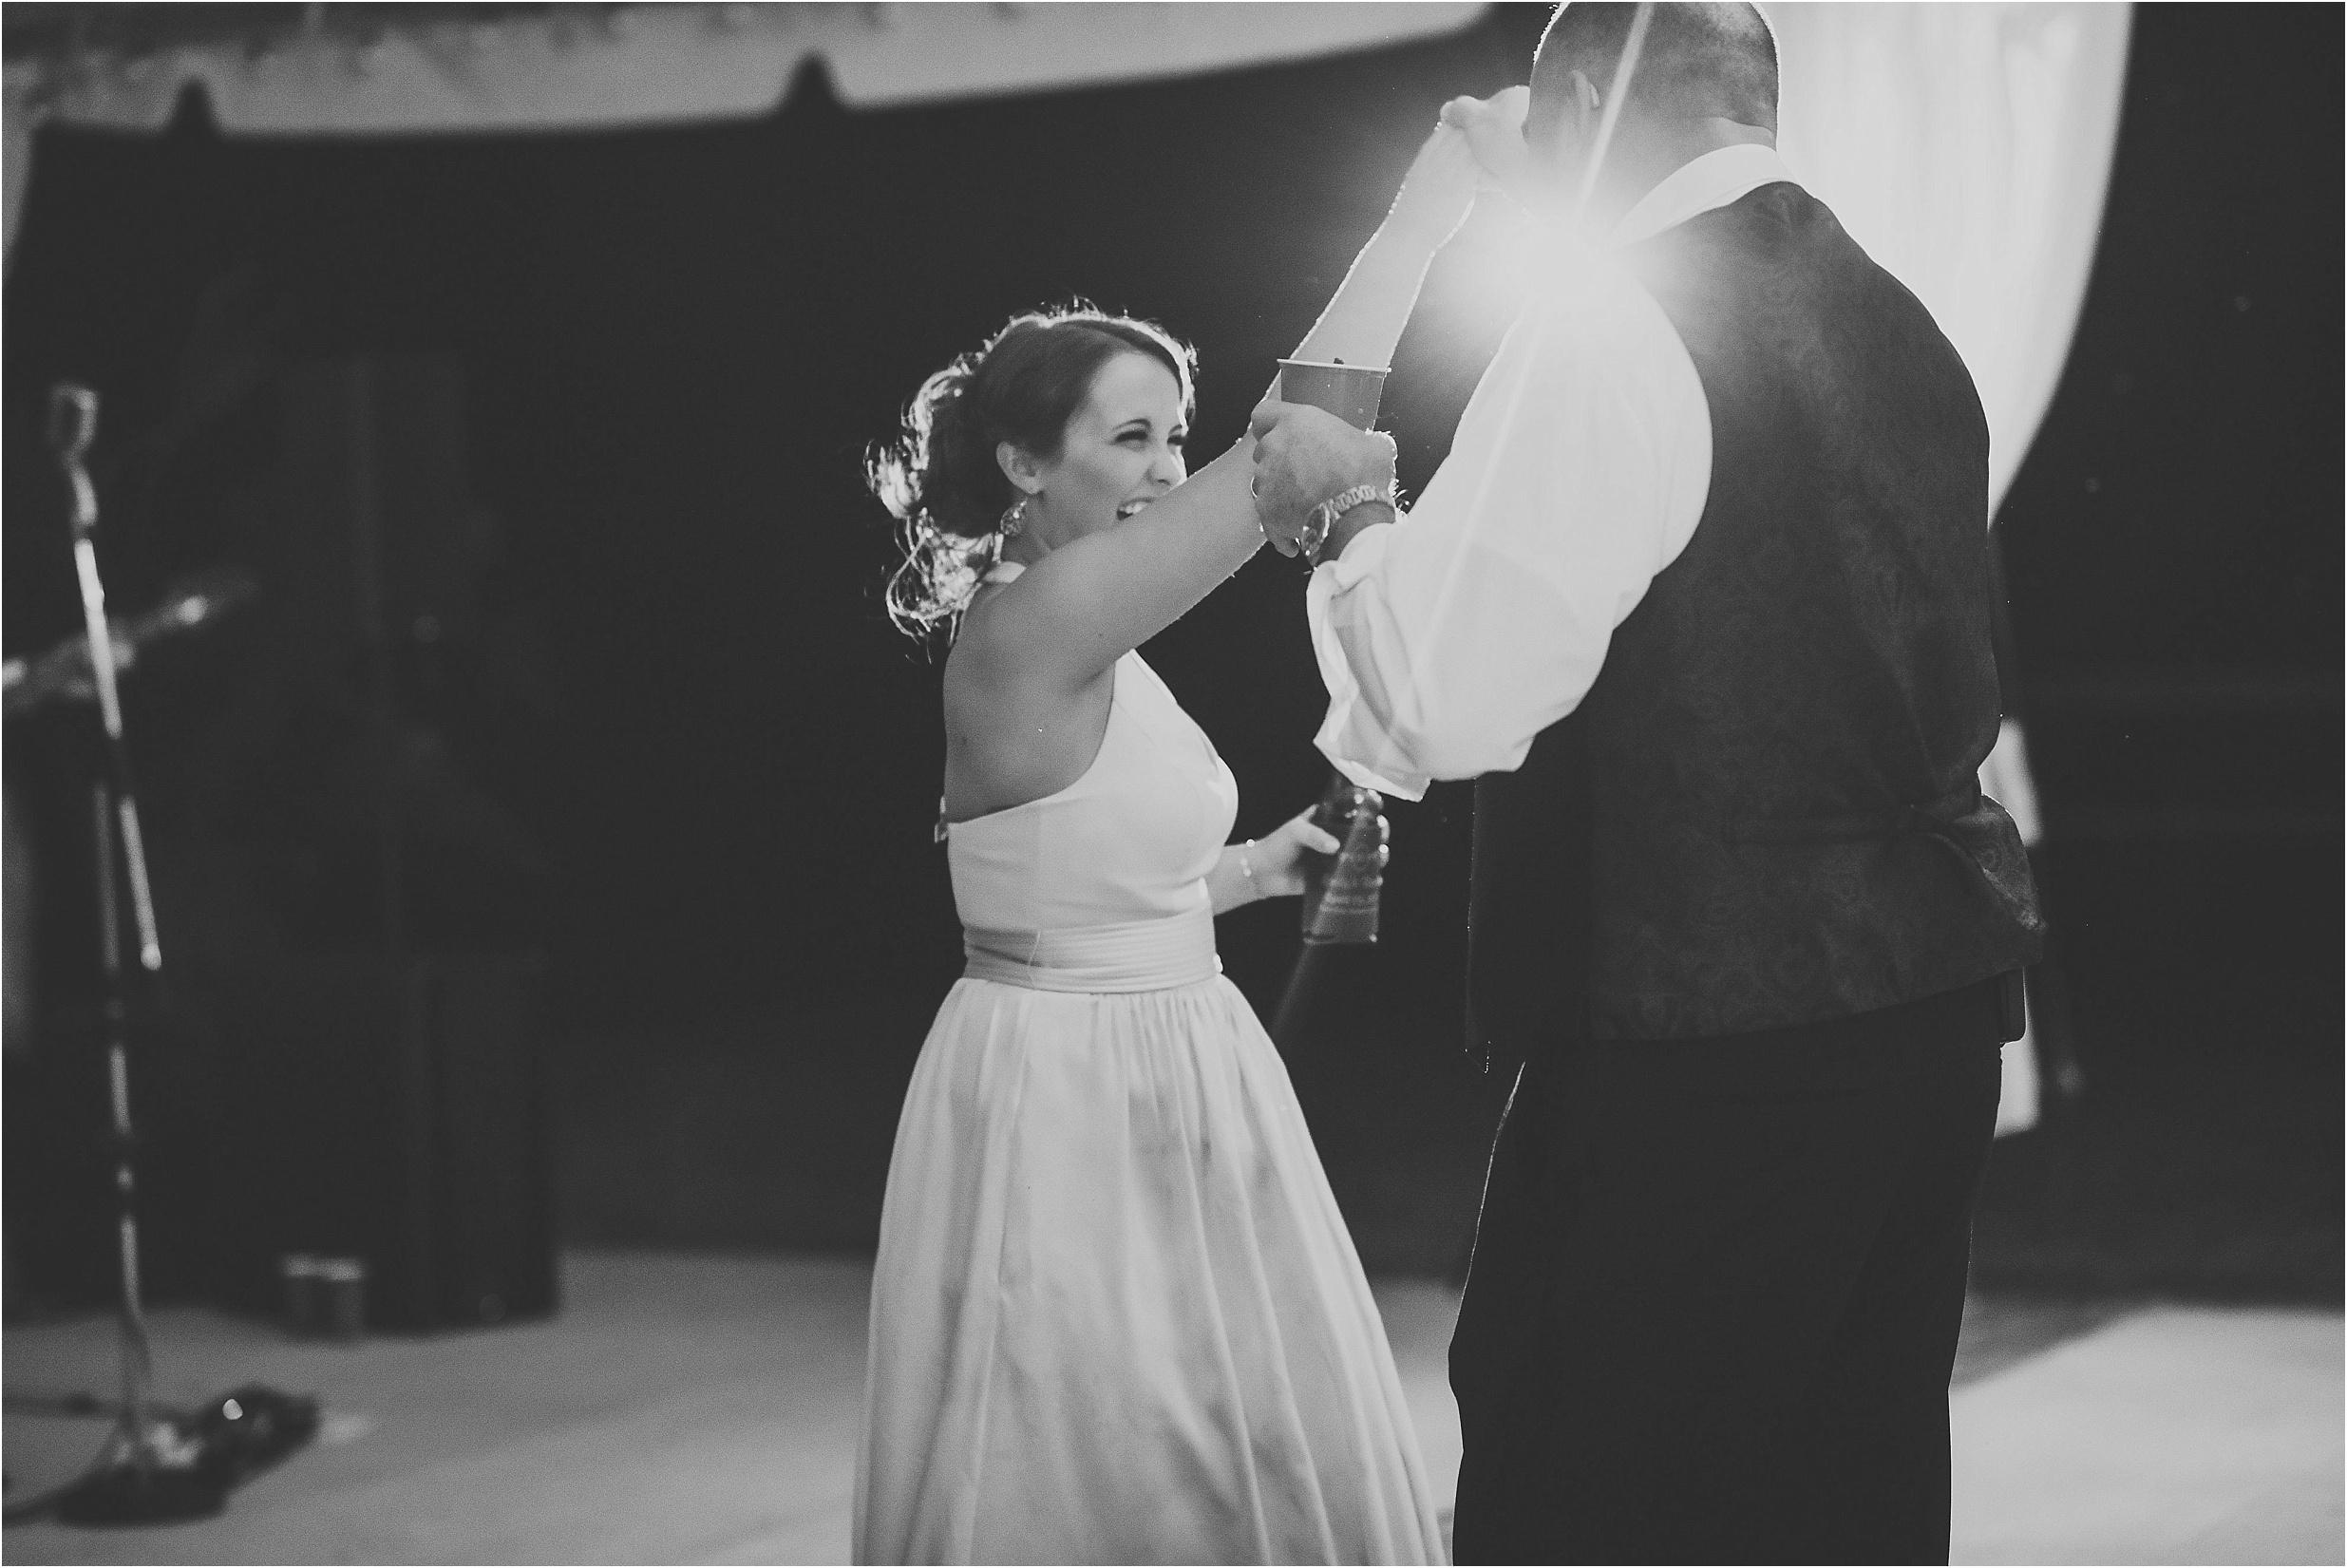 View More: http://christiclarkphotography.pass.us/brandonemily